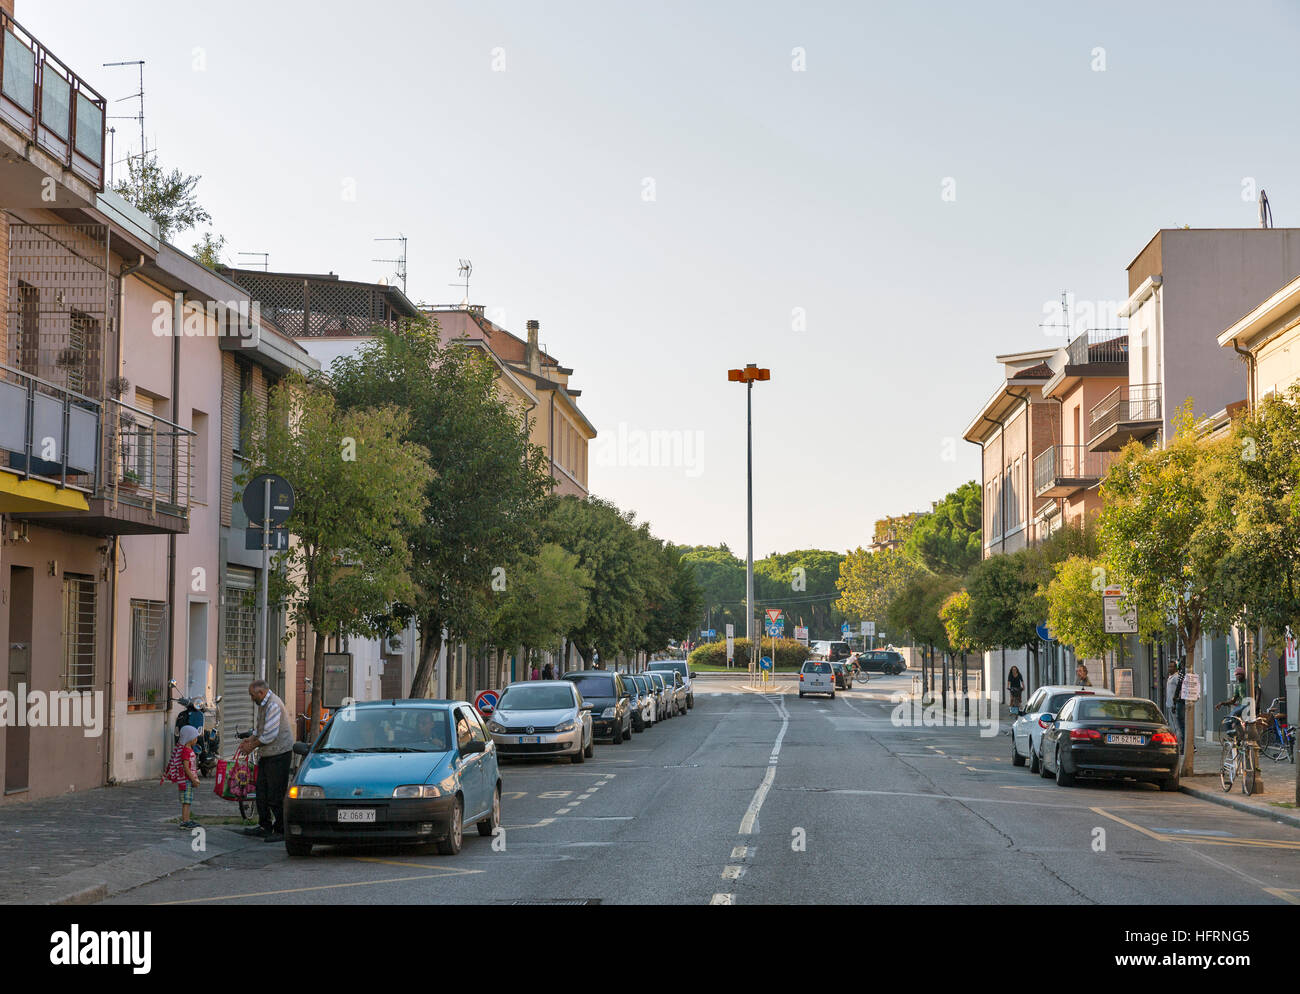 People on Via dei Mille street with old buildings and parked cars. Stock Photo